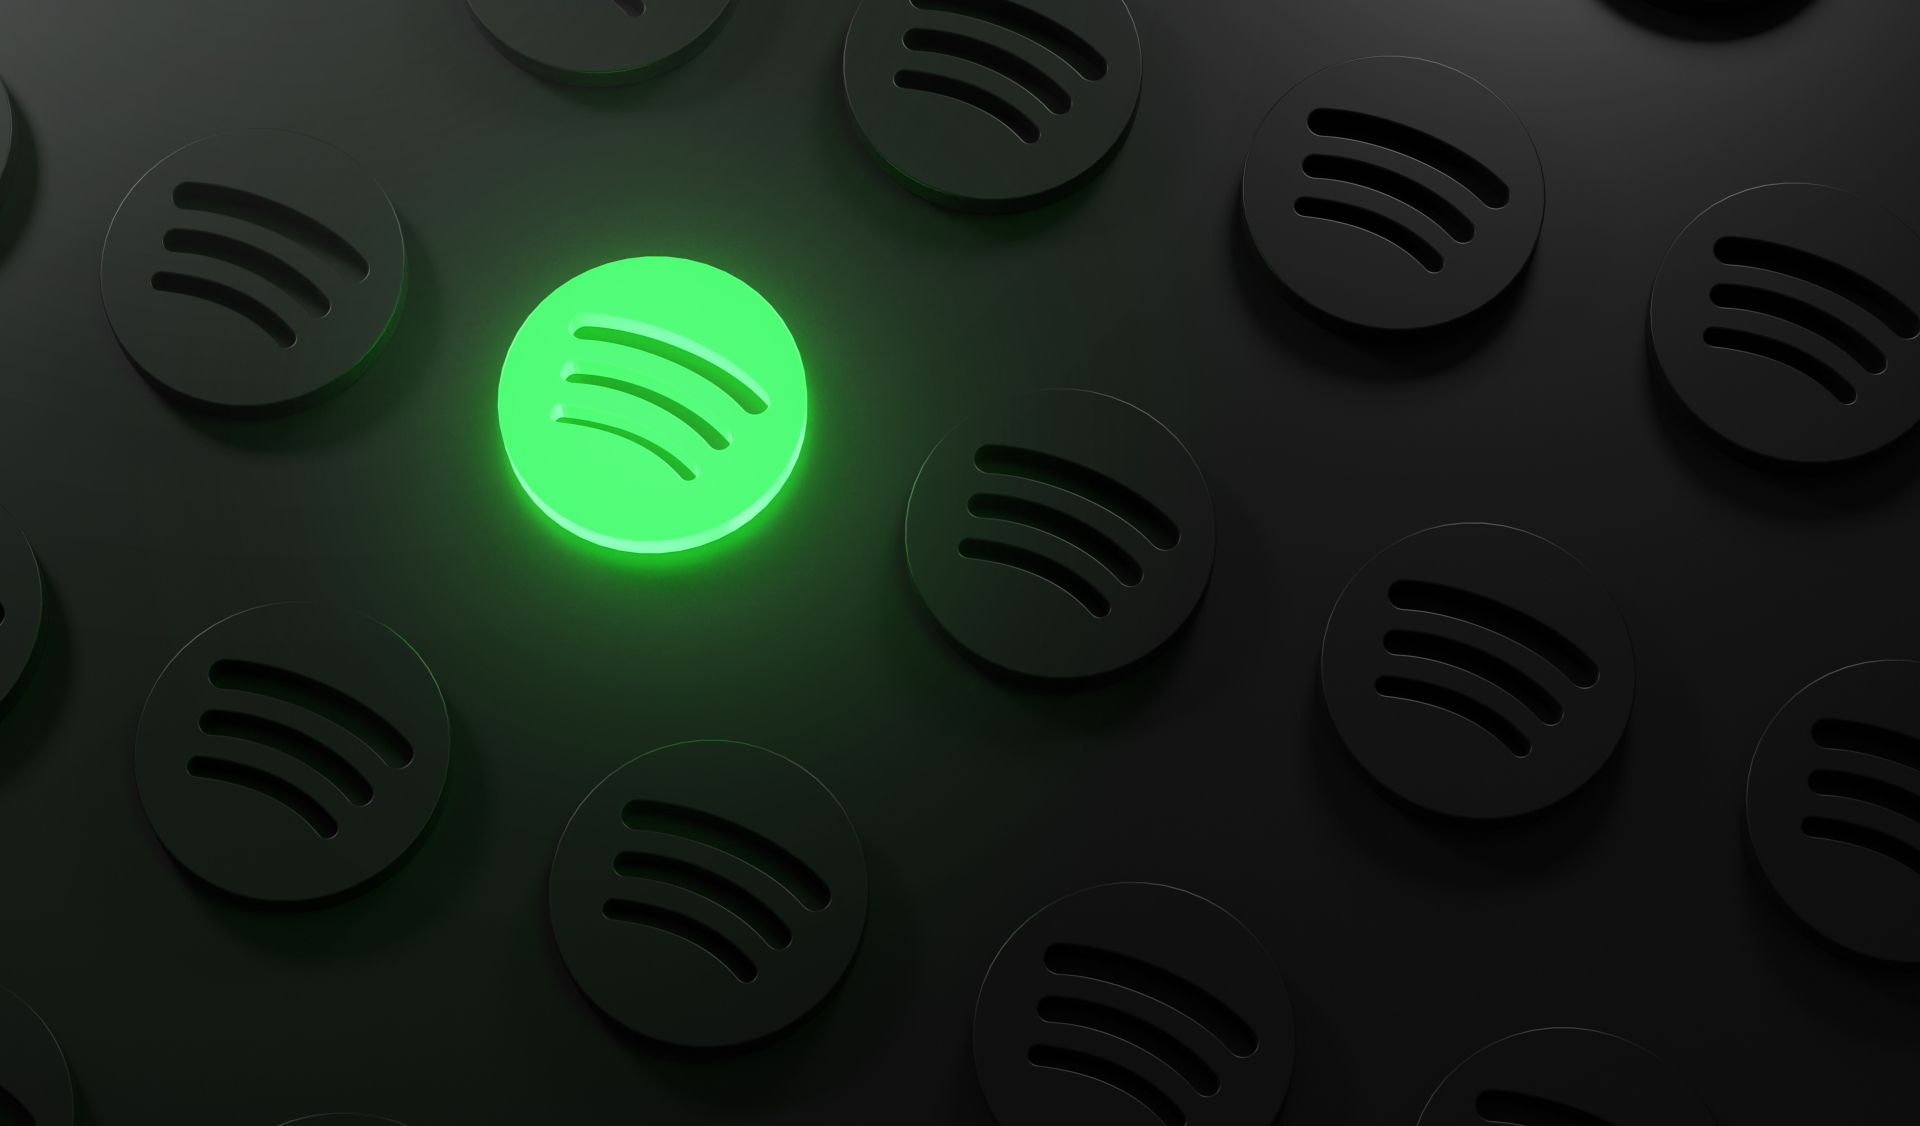 Spotify has started testing the integration of Web3 wallets
